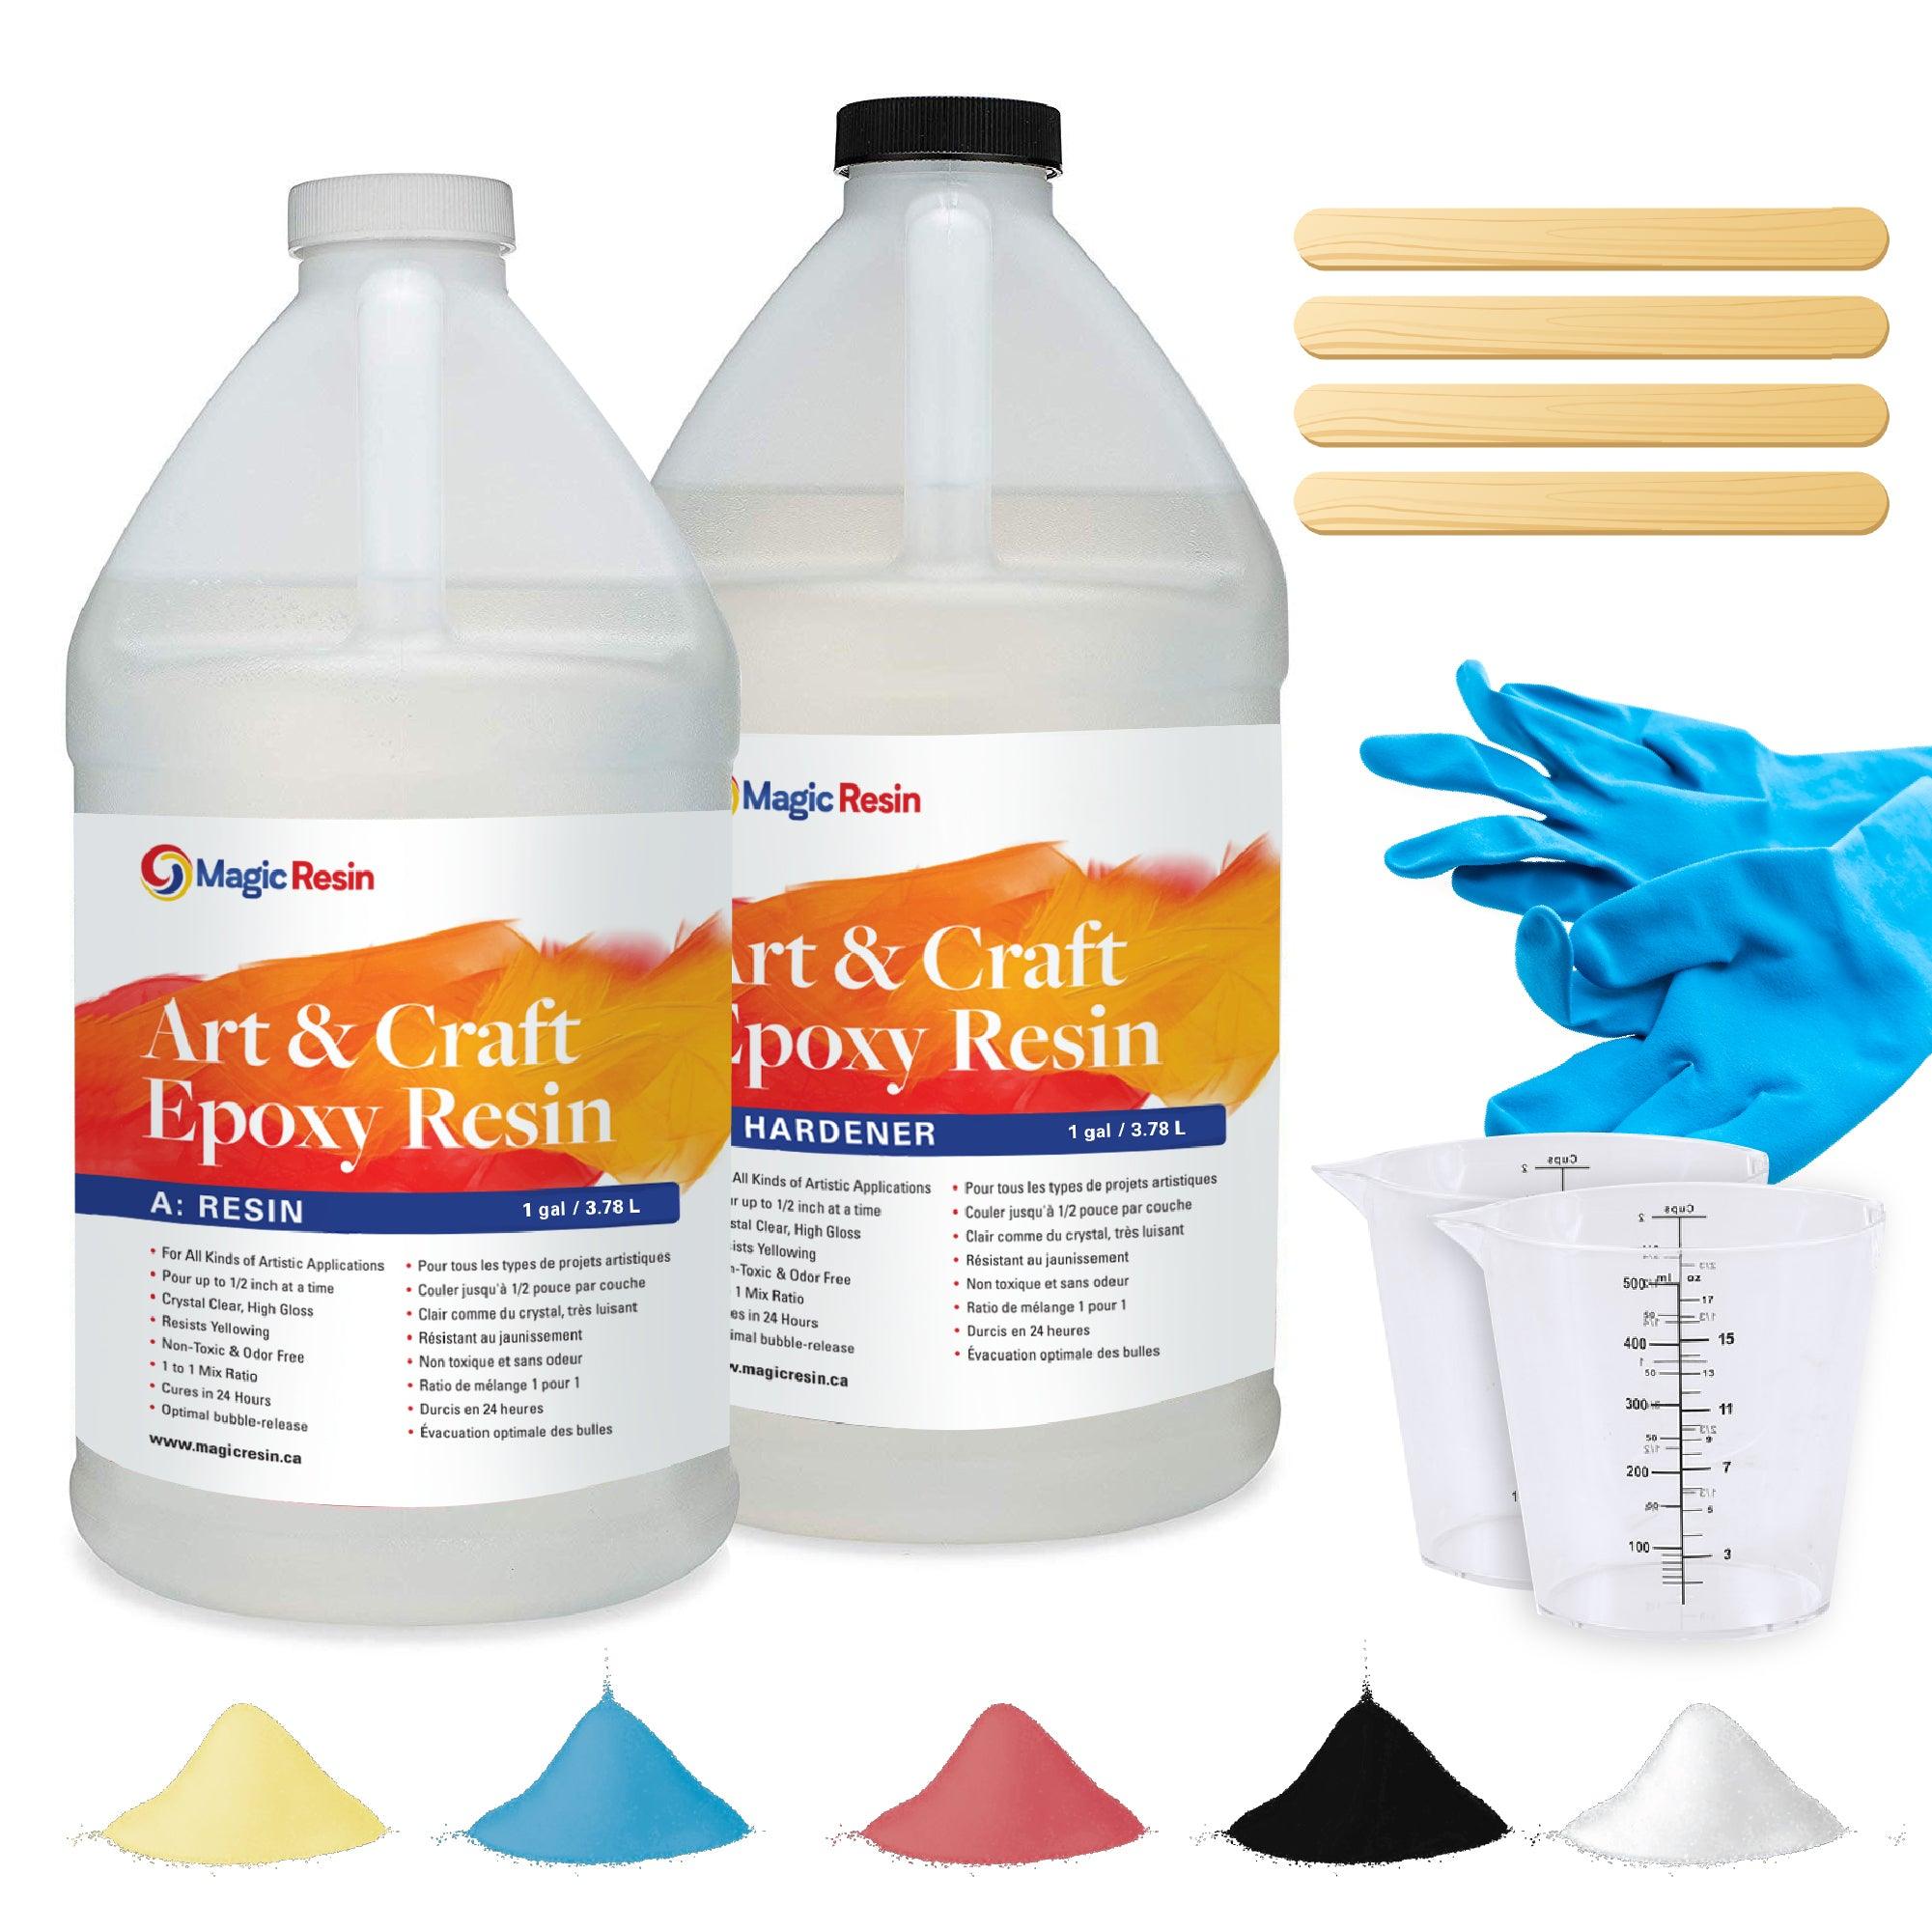 2 Gallon (7.6 L) | Art & Craft Epoxy Resin Kit | Includes 3 pairs of gloves, 2 cups, 4 sticks & 5 x 5g mica powder bags | Free express shipping - Magic Resin USA